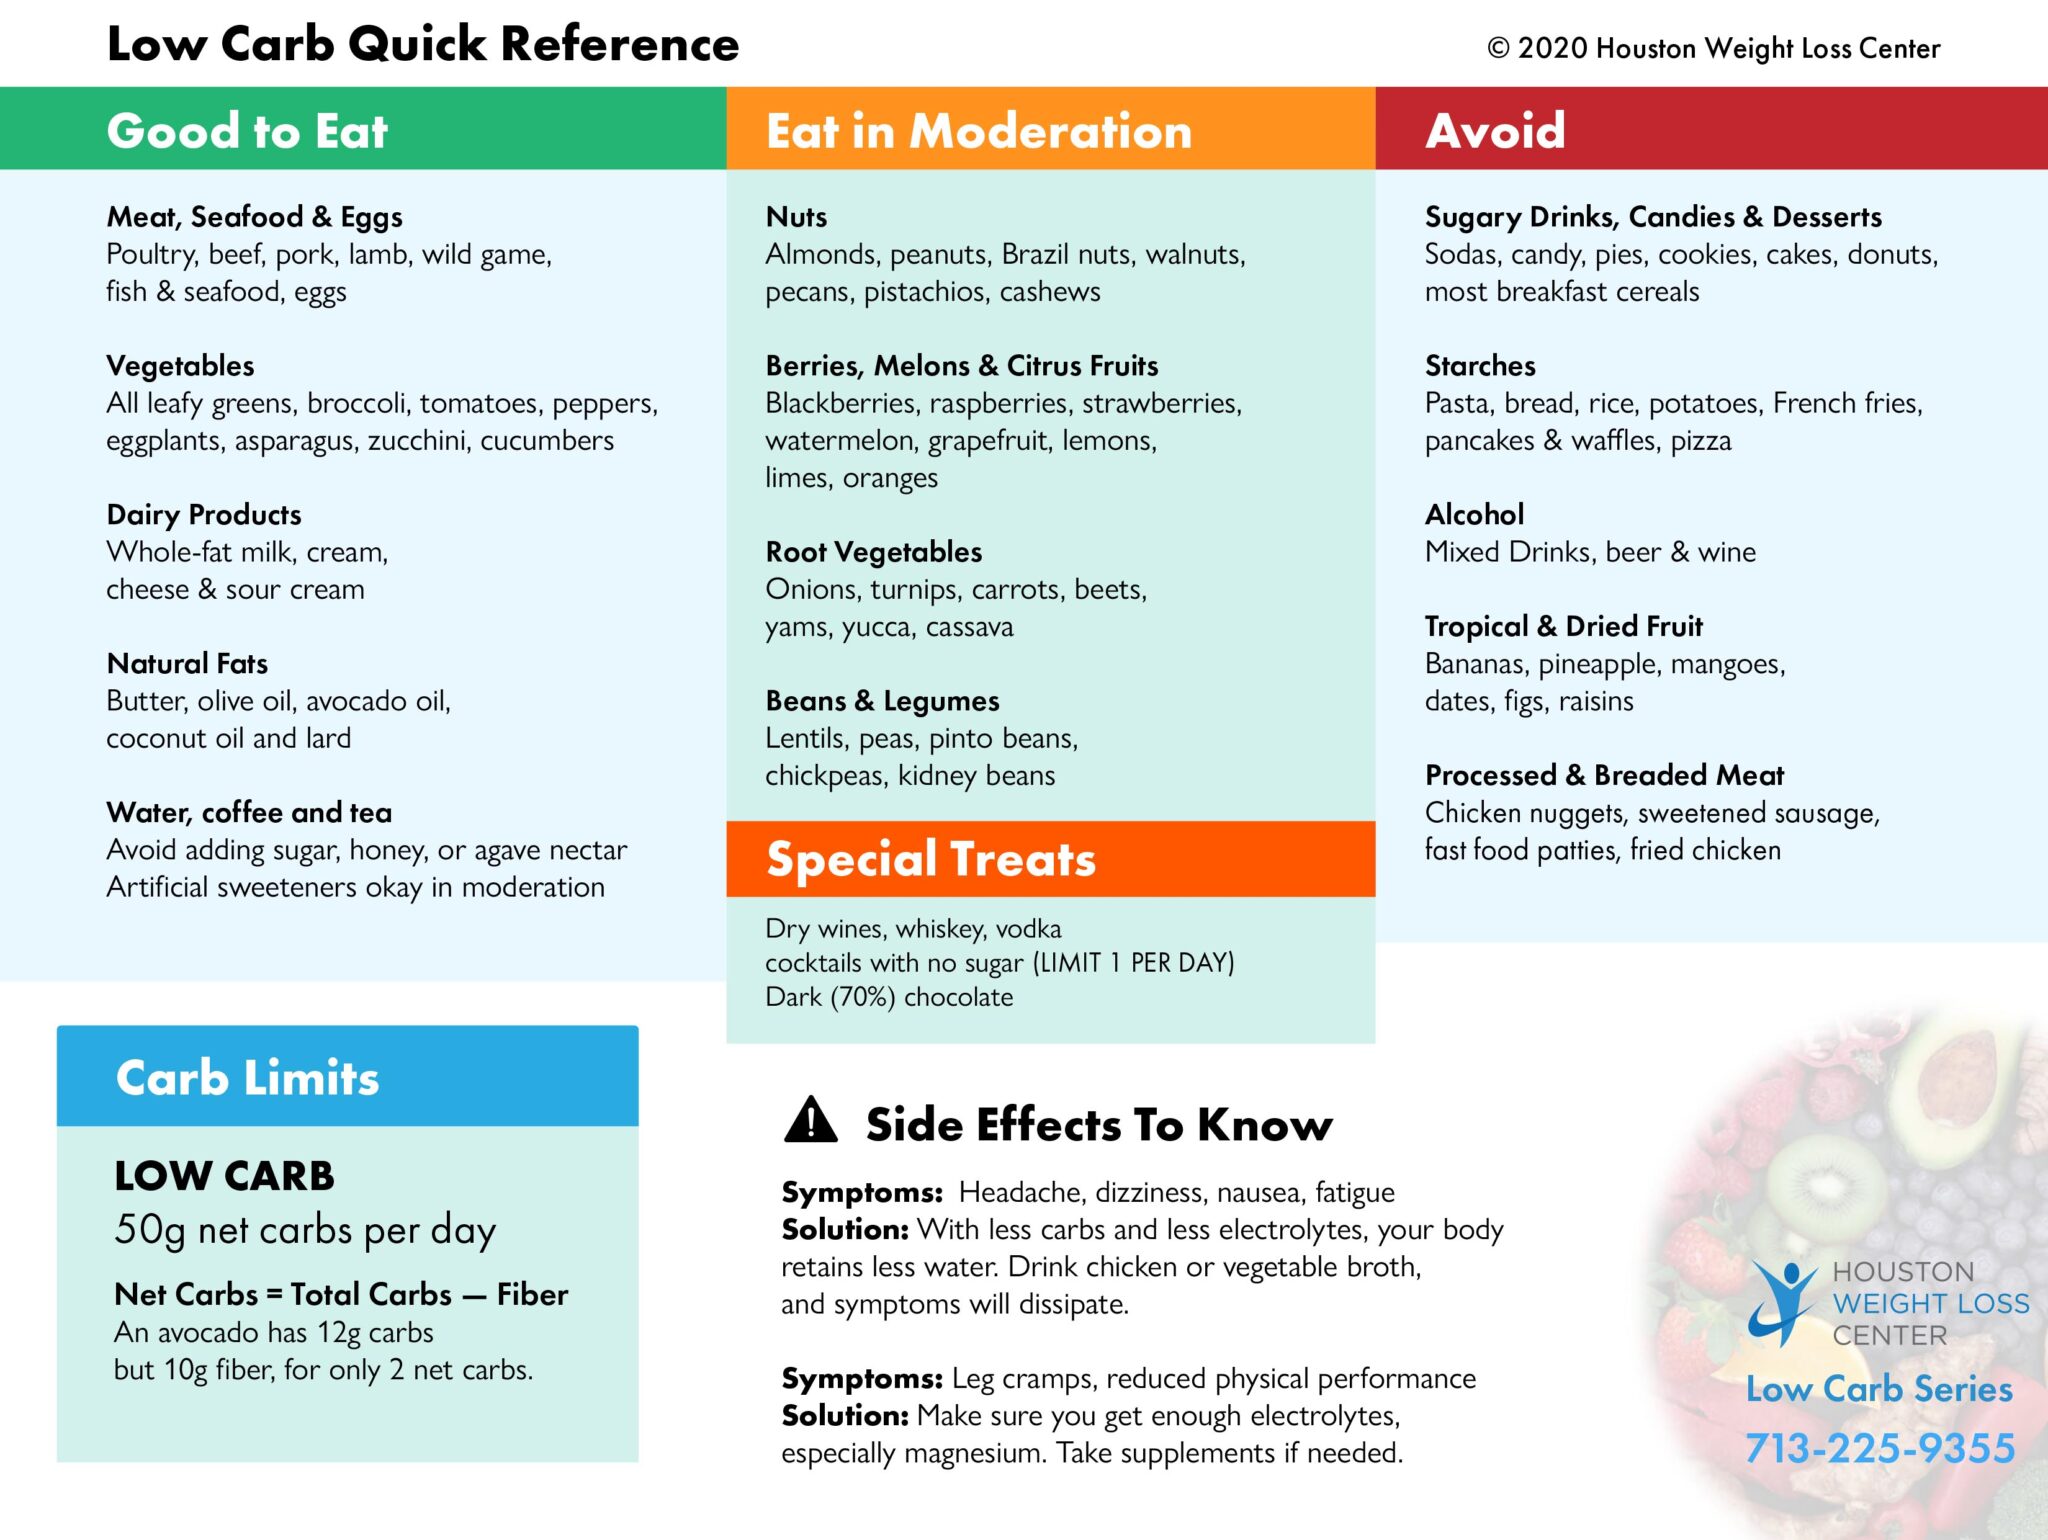 Quick Reference - Houston Weight Loss Center